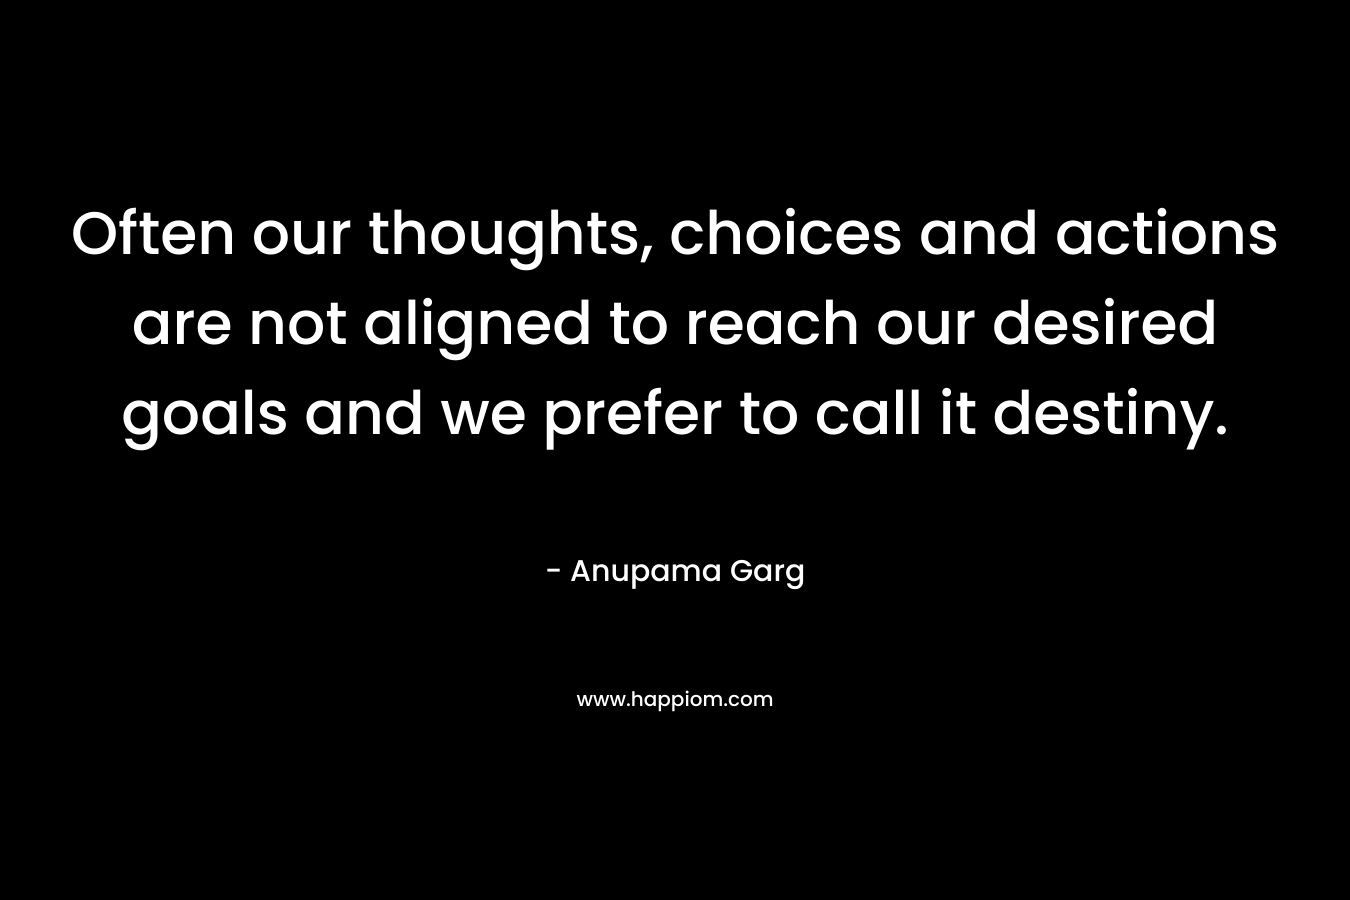 Often our thoughts, choices and actions are not aligned to reach our desired goals and we prefer to call it destiny. – Anupama Garg